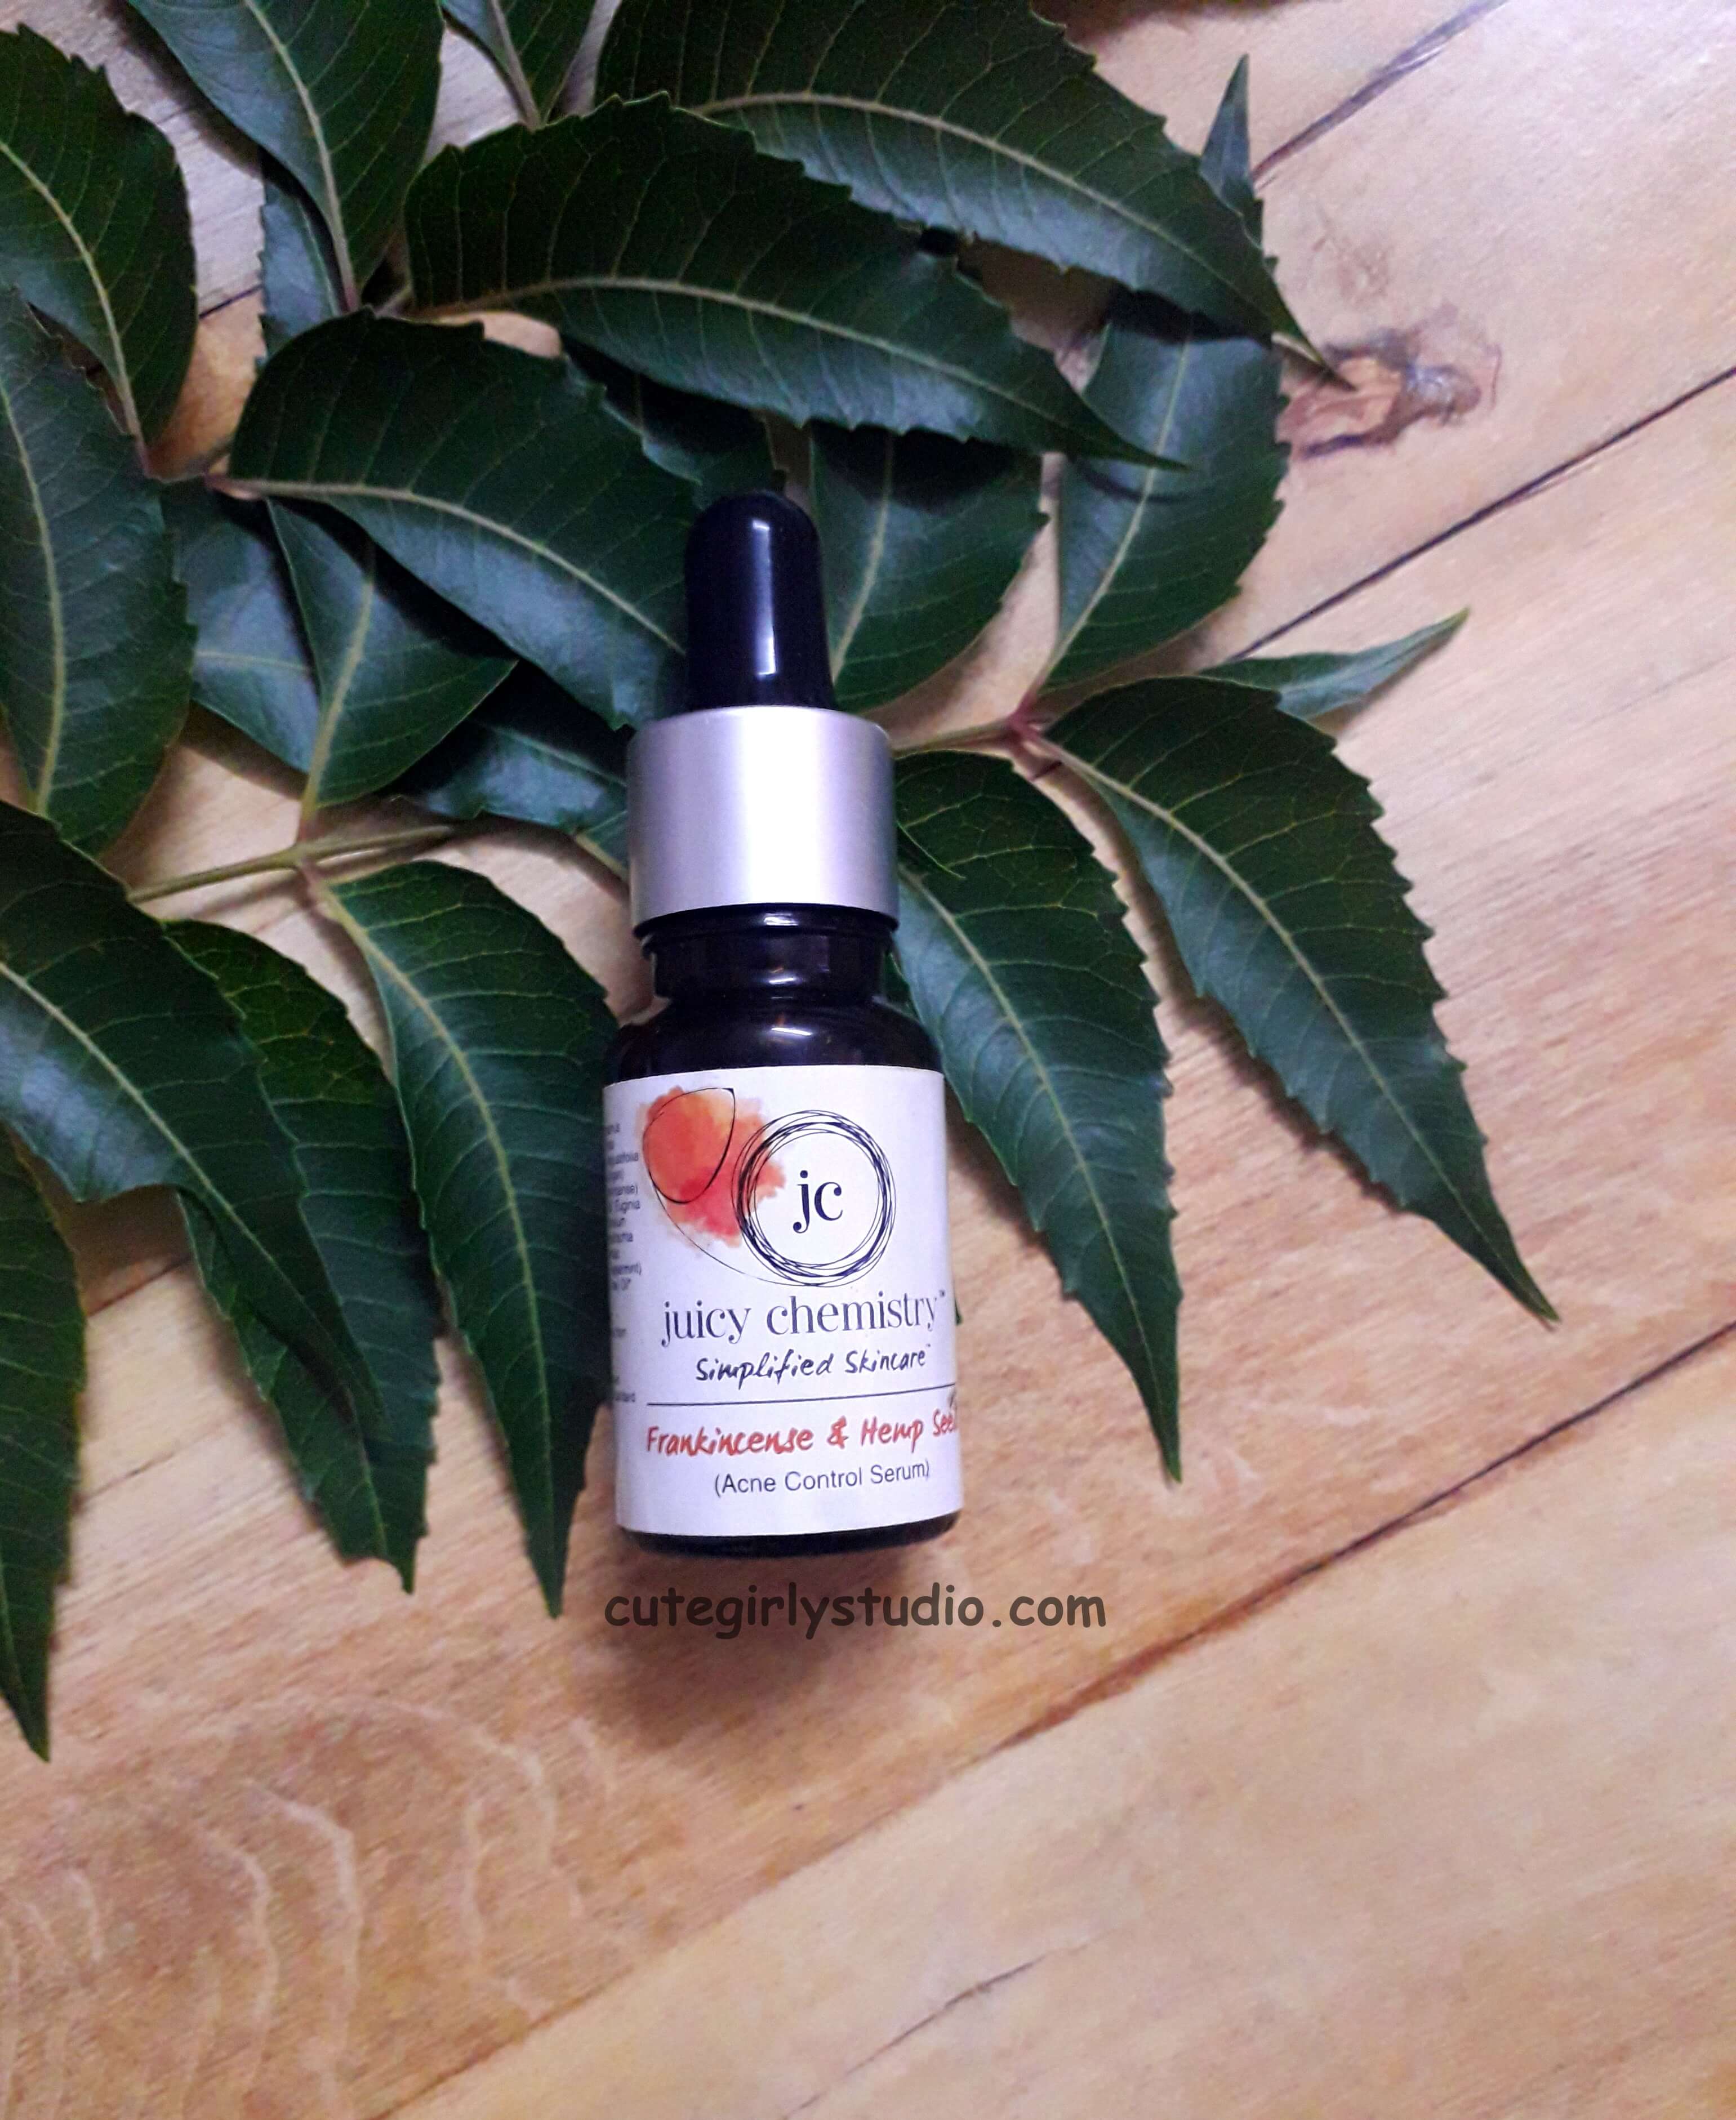 Juicy Chemistry Frankincense And Hemp Seed Acne Control Serum Review Cute Girly Studio